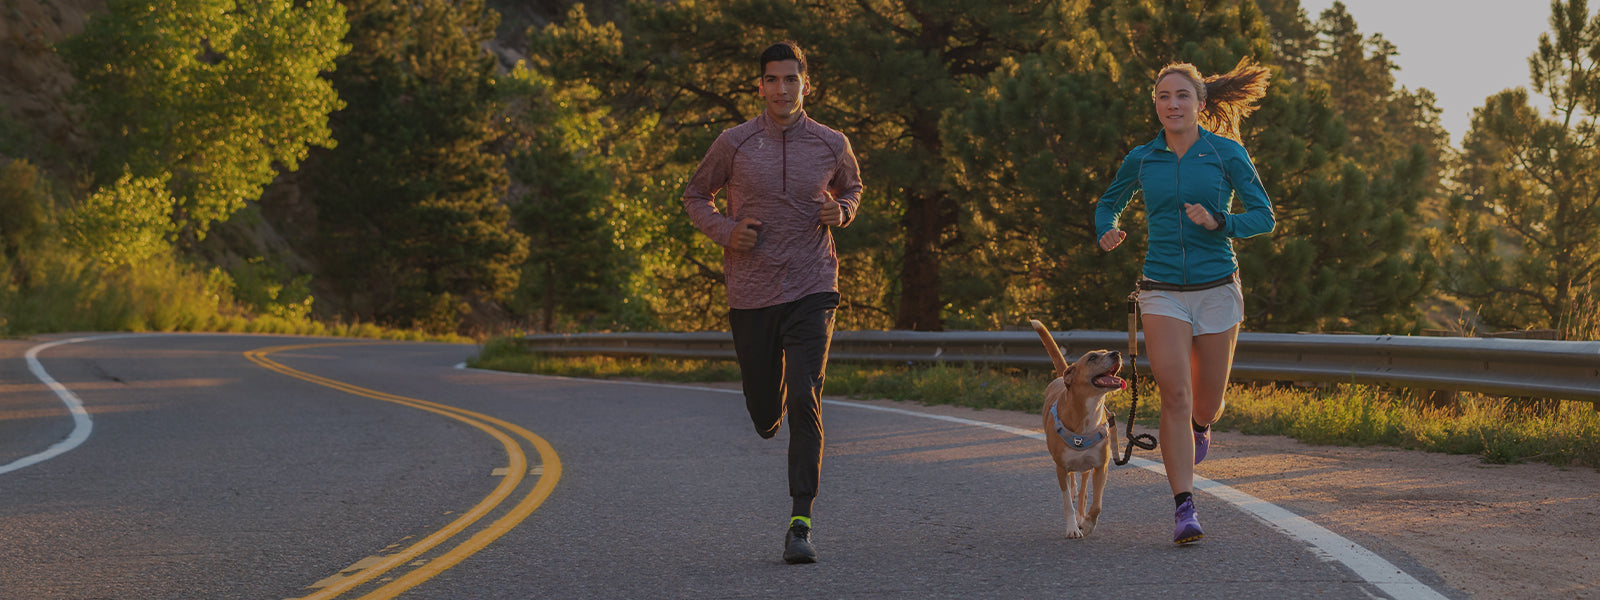 Man and woman running down road with dog wearing Swiftwick socks